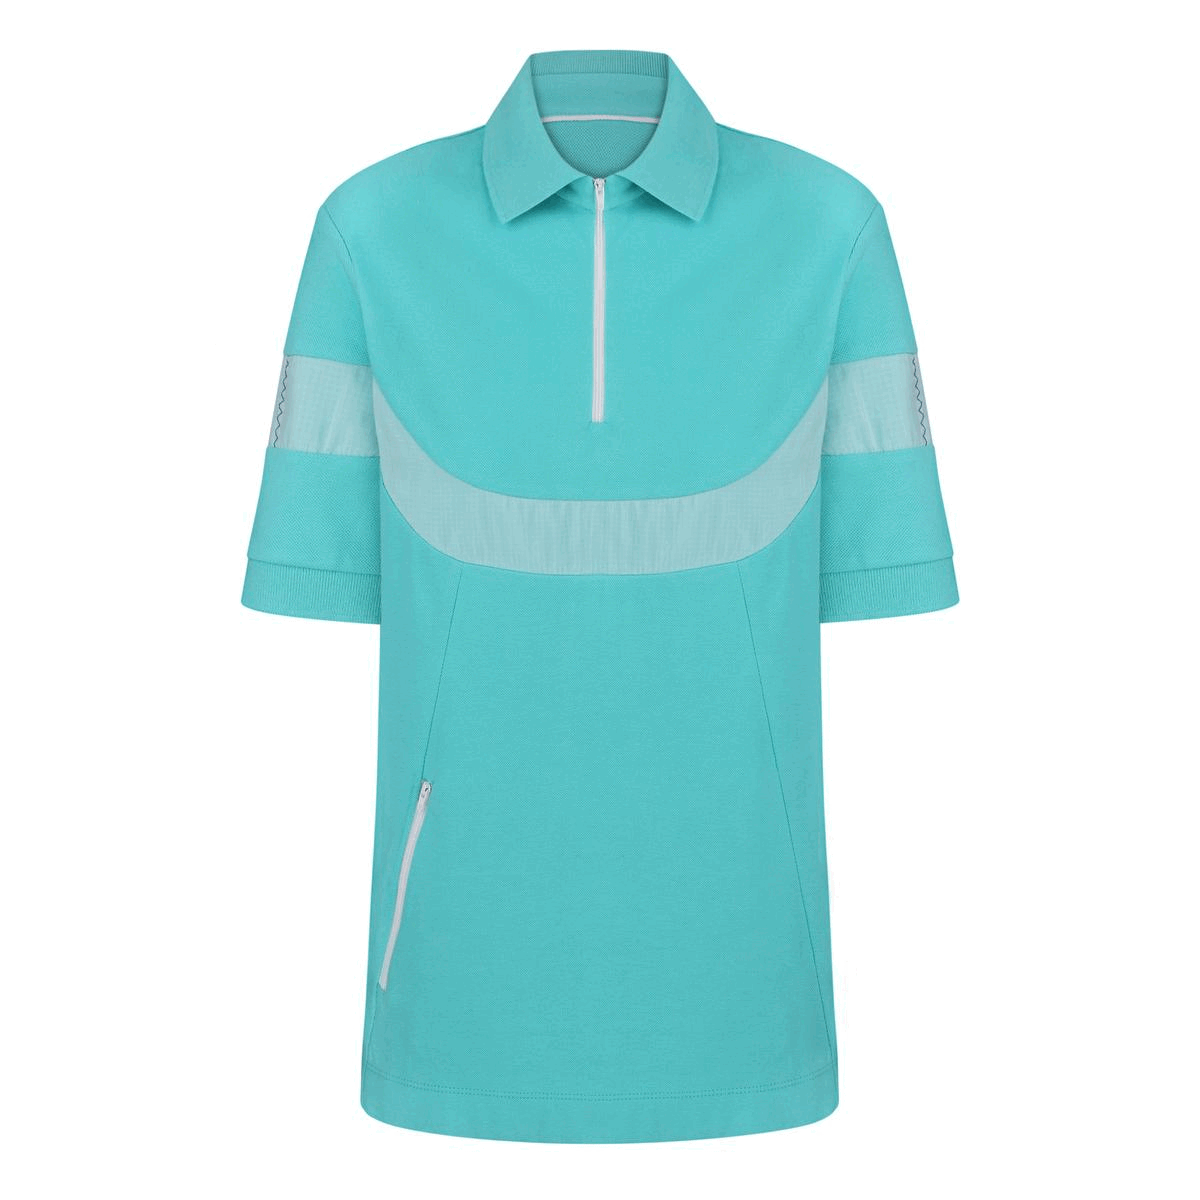 Green/Blue Polo with short sleeves & pockets from REwind